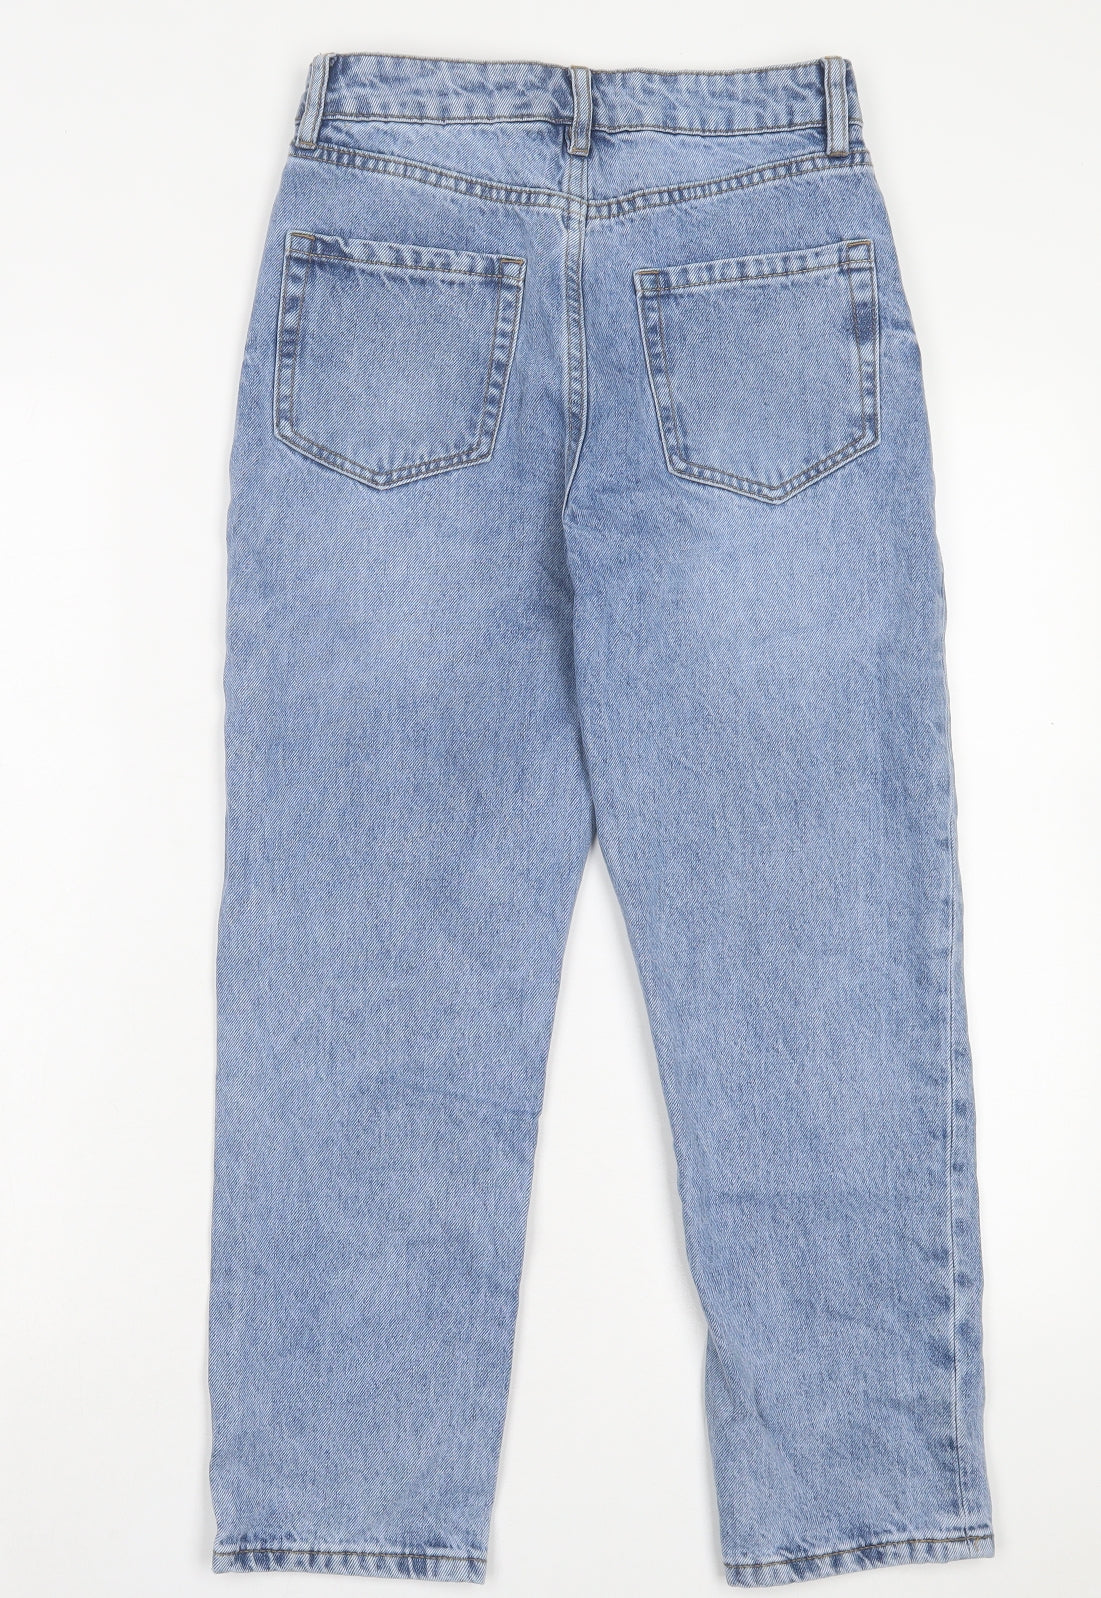 Forever New Womens Blue Cotton Straight Jeans Size 6 L25 in Regular Button